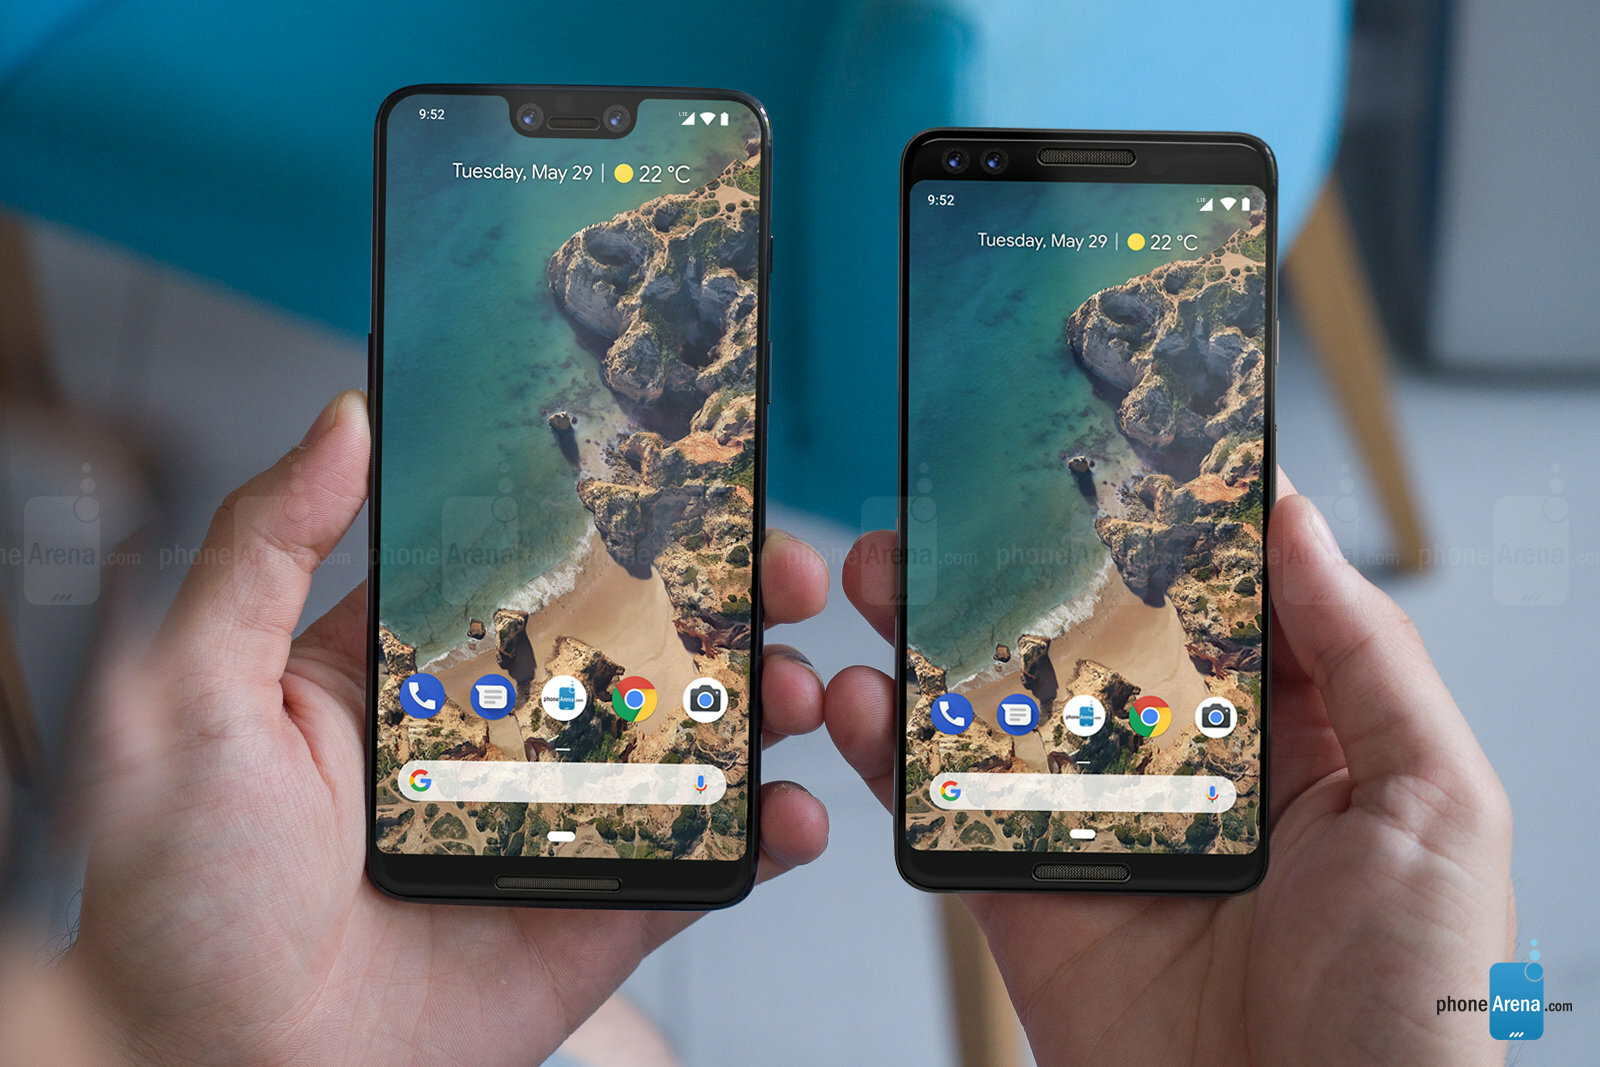 How much power will the Google Pixel 3 pack?